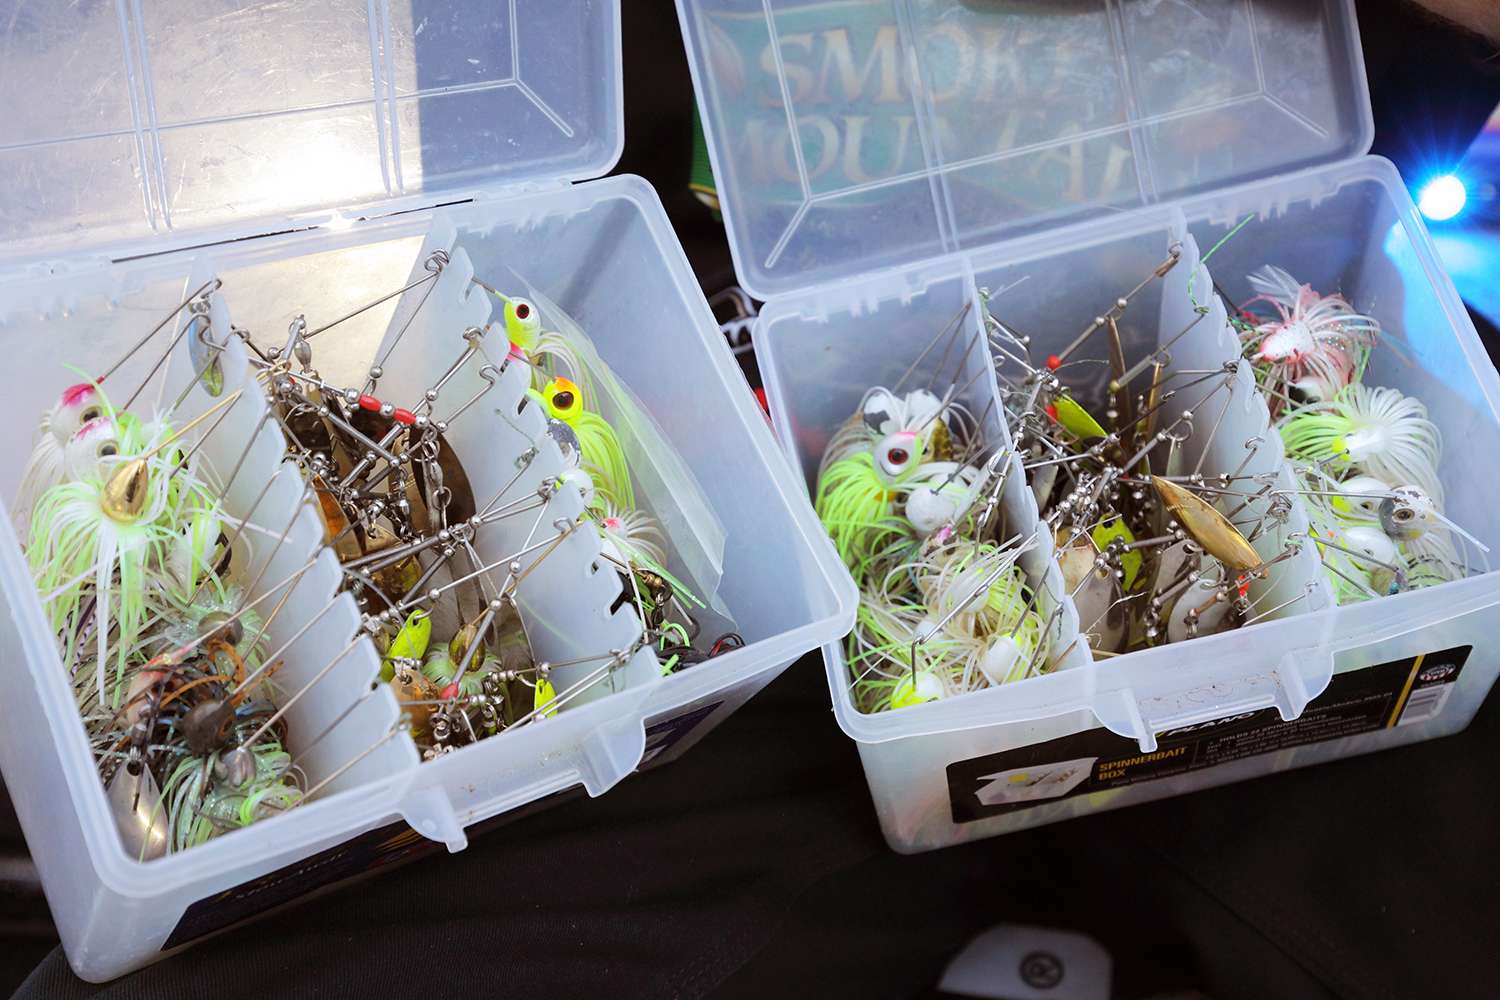 The same compartment also held two boxes of spinnerbaits. Whites and yellows were the colors of choice at this point in Bertrand's season.